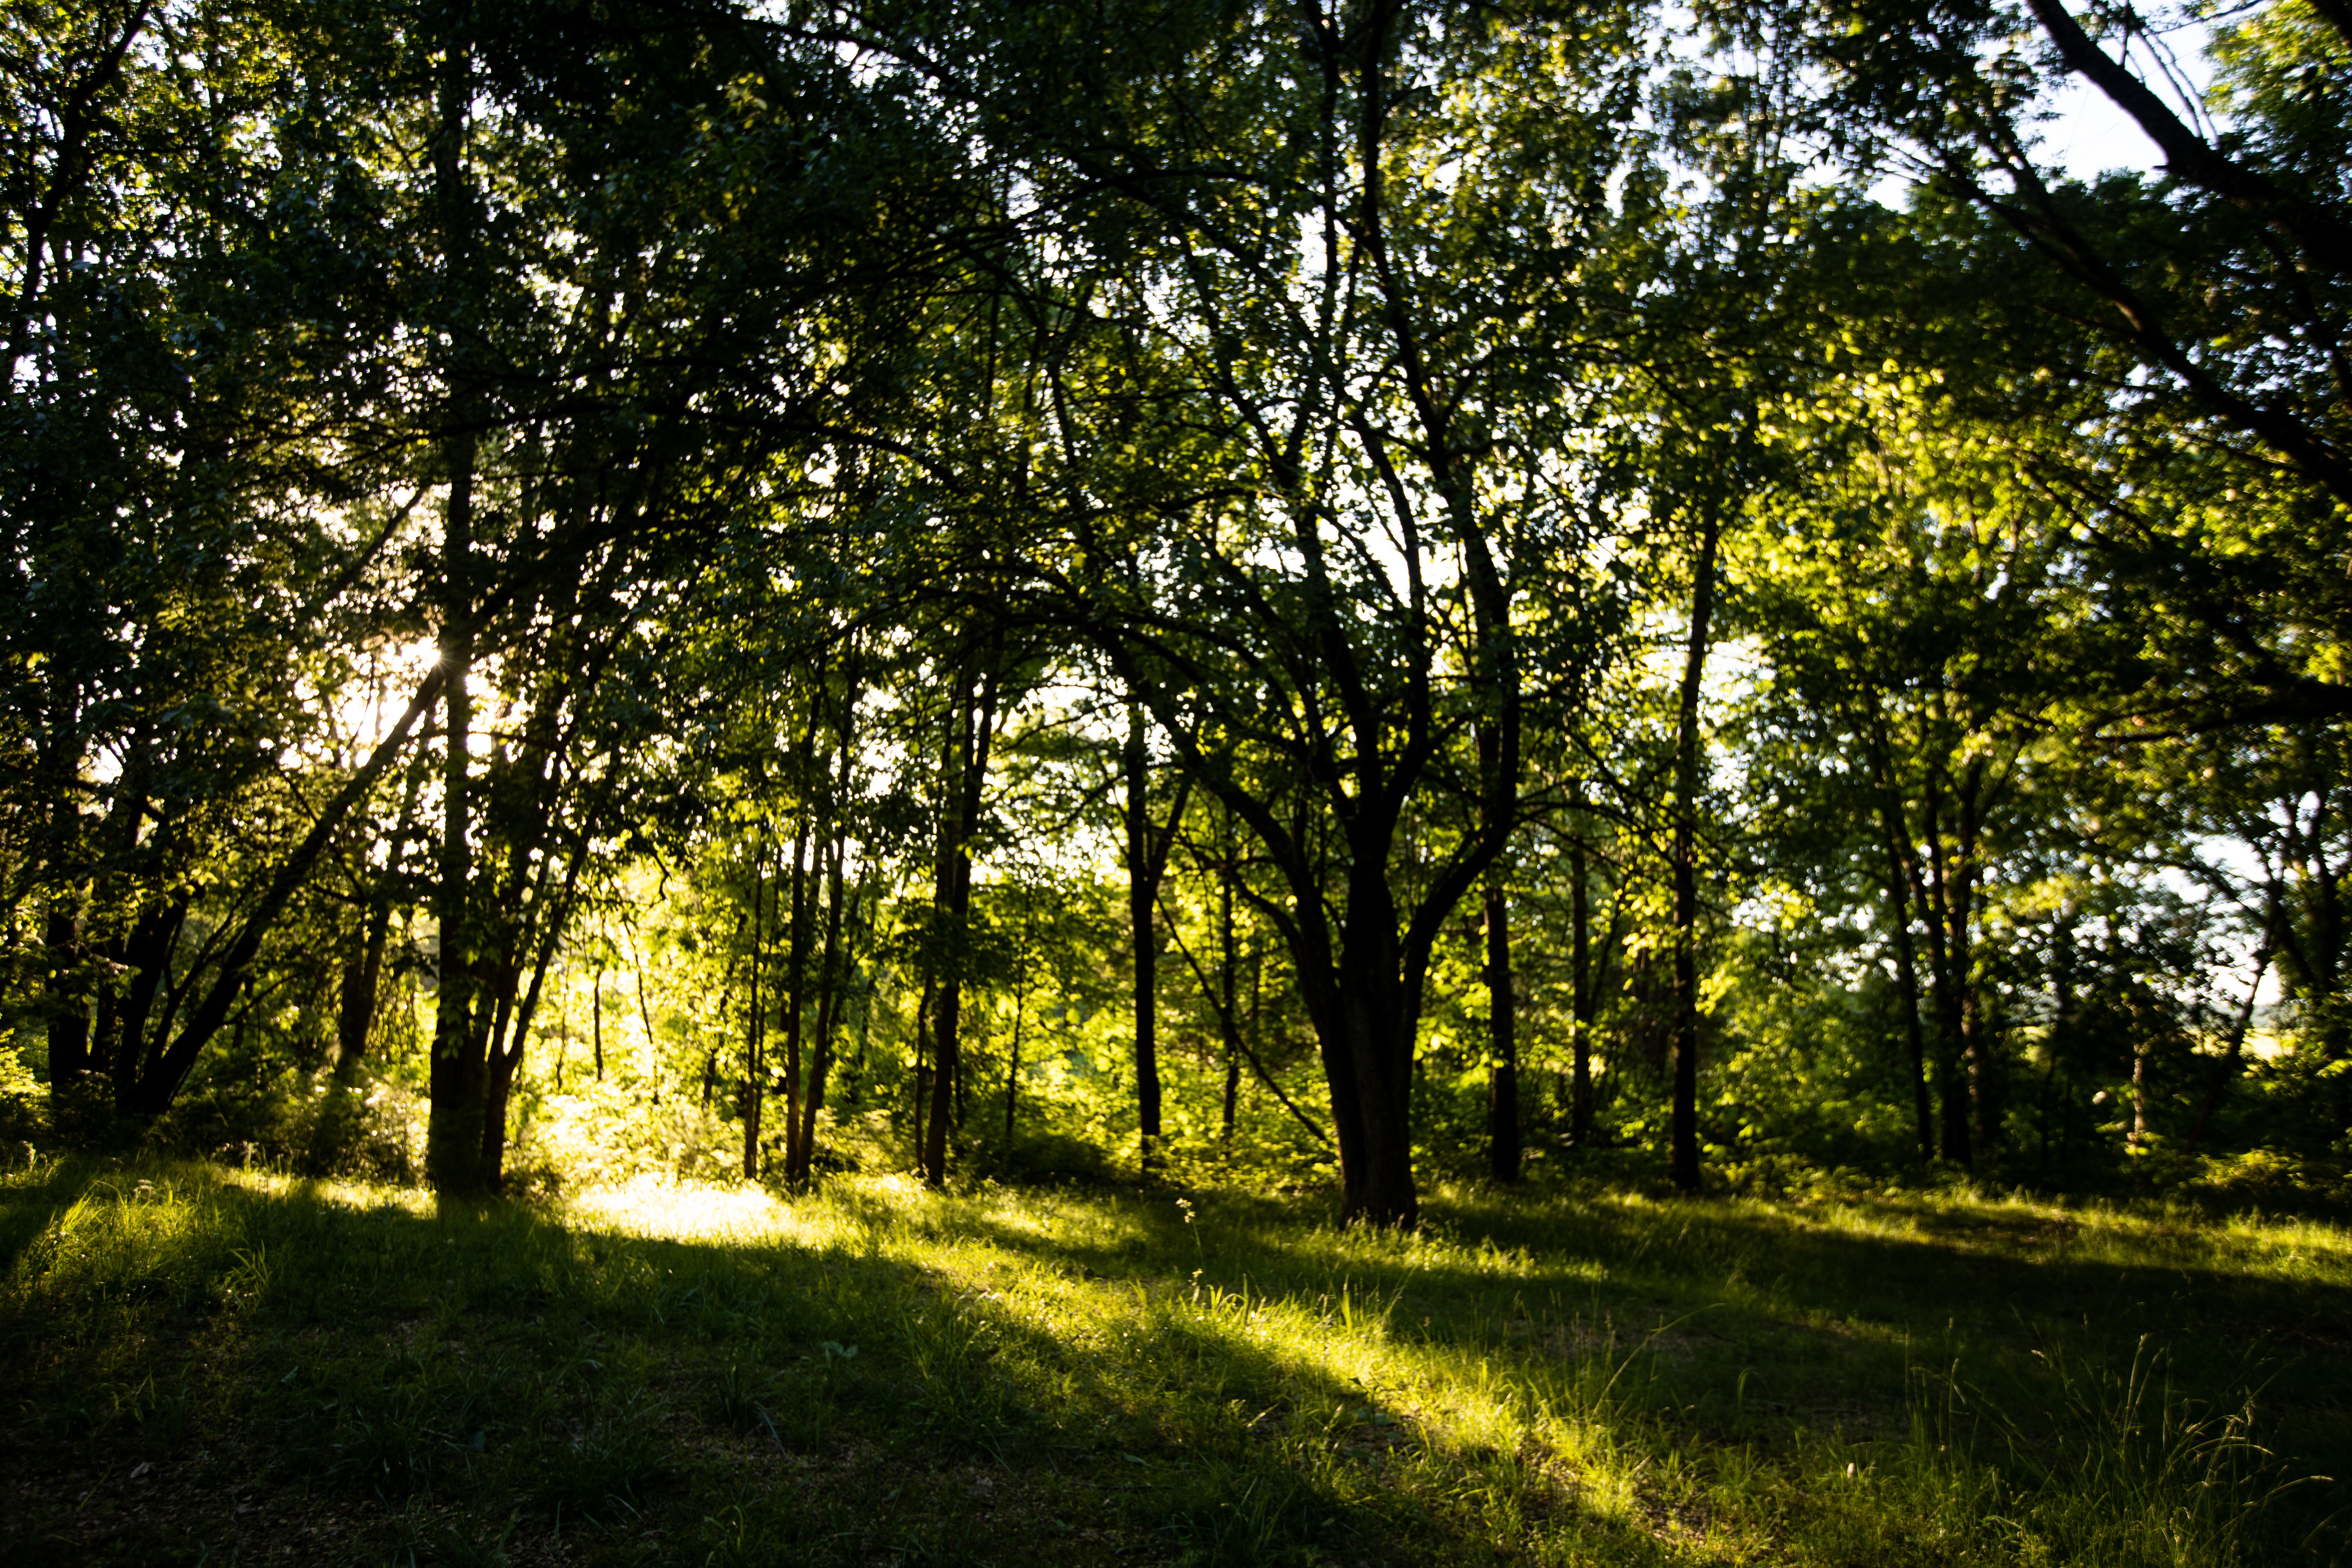 Photo of the rays of sunshine, shining though dark green trees, with long shadows falling on grass